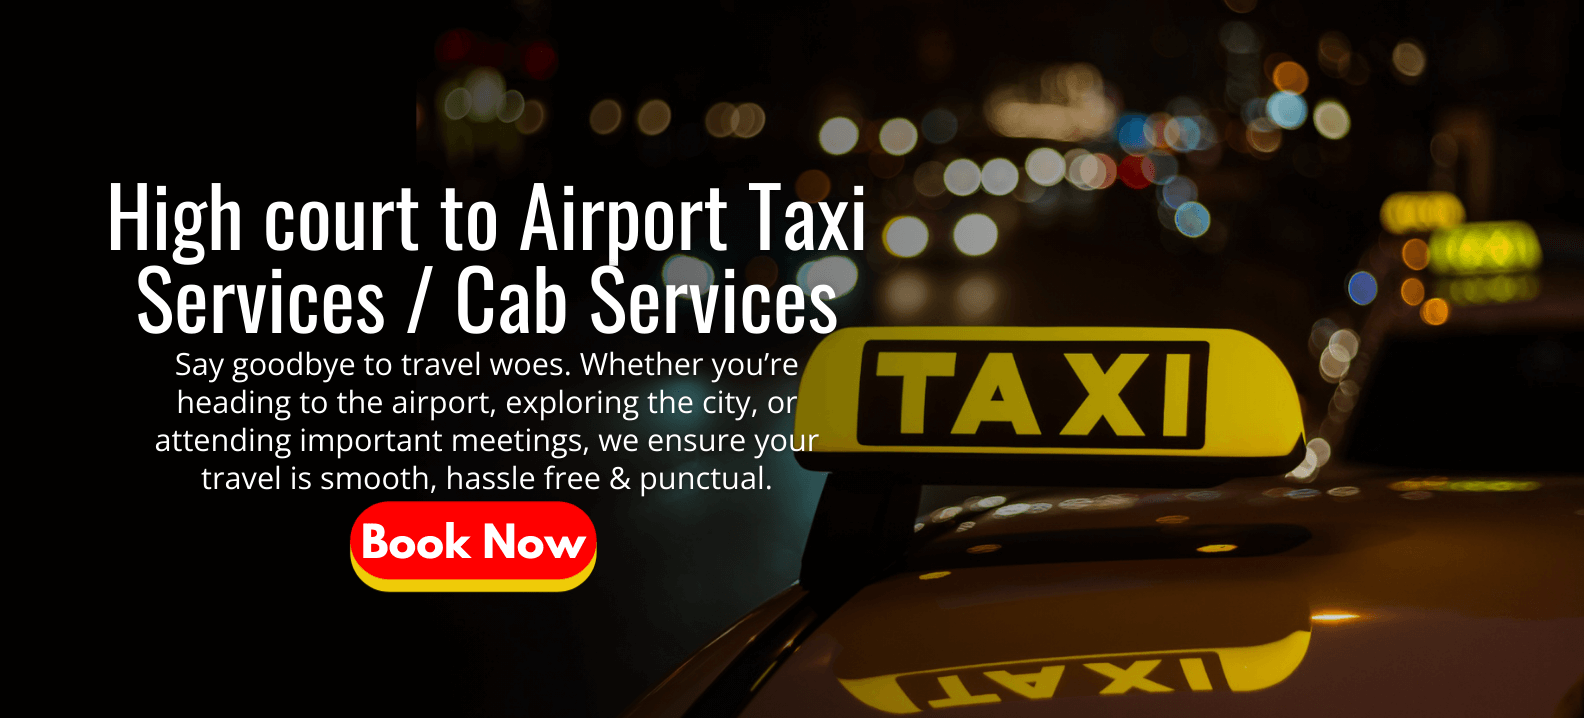 High court to Airport Taxi Services _ Cab Services